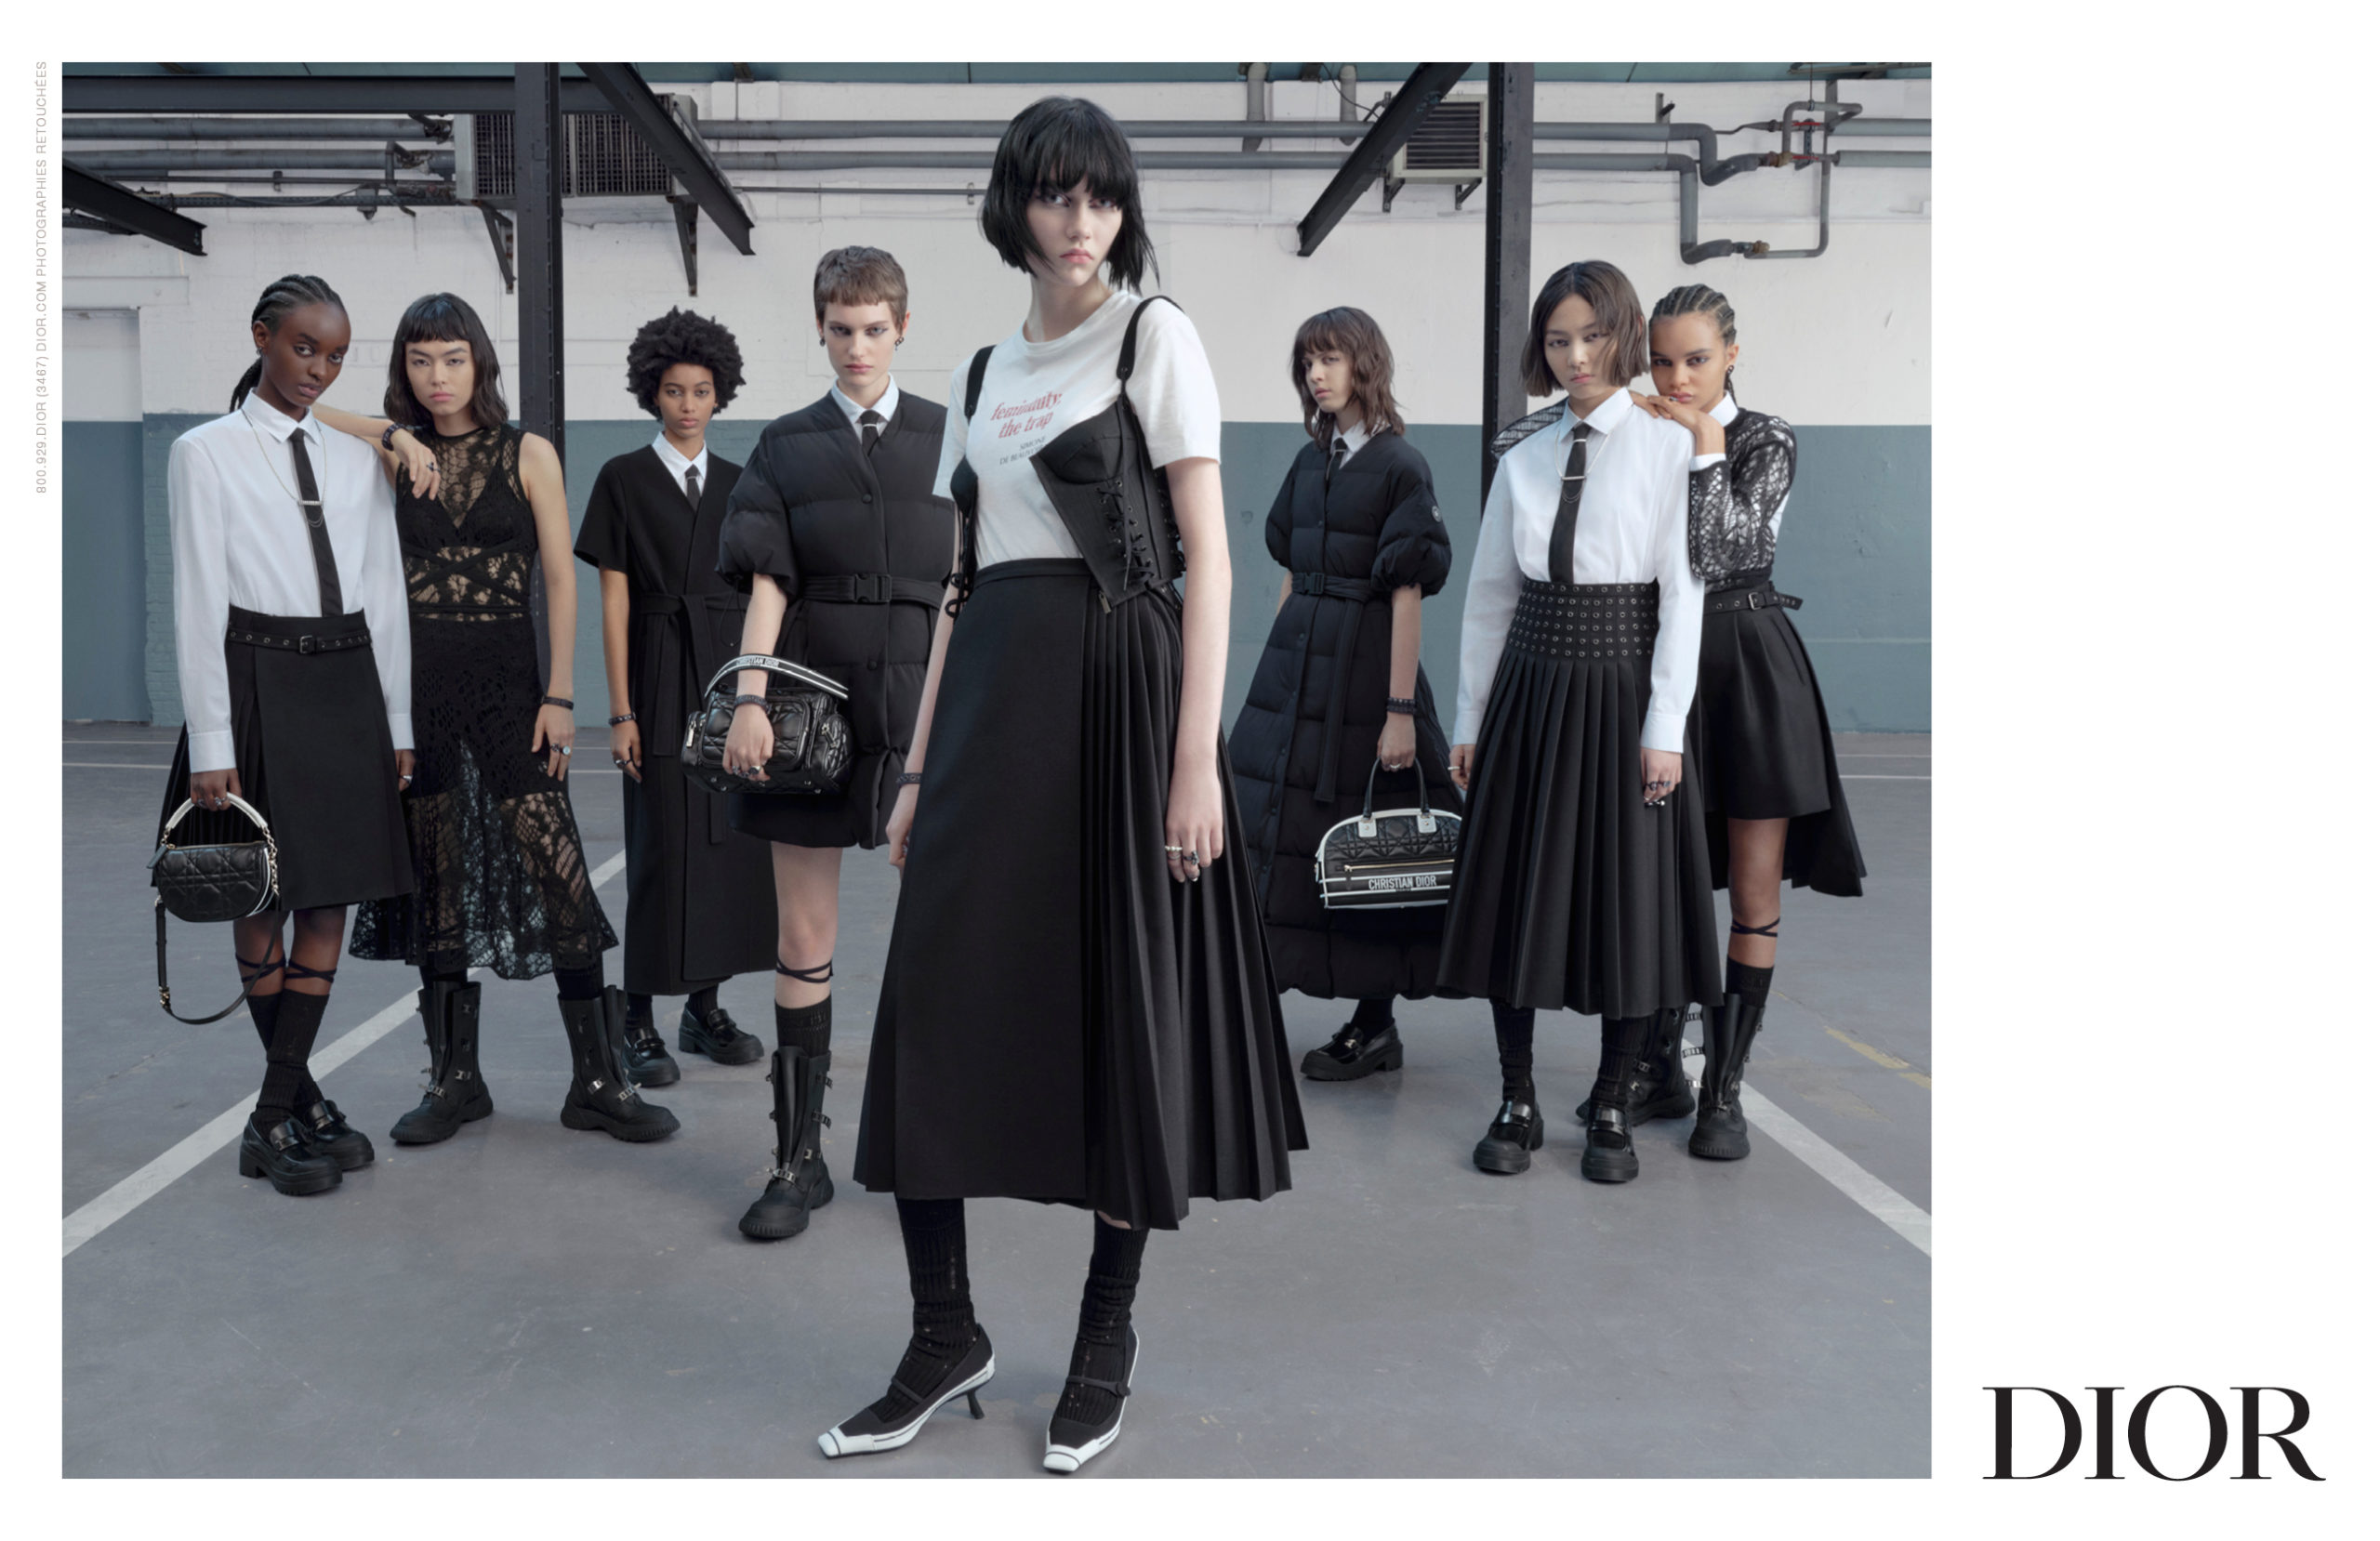 Dior fall 2022 campaign honors women